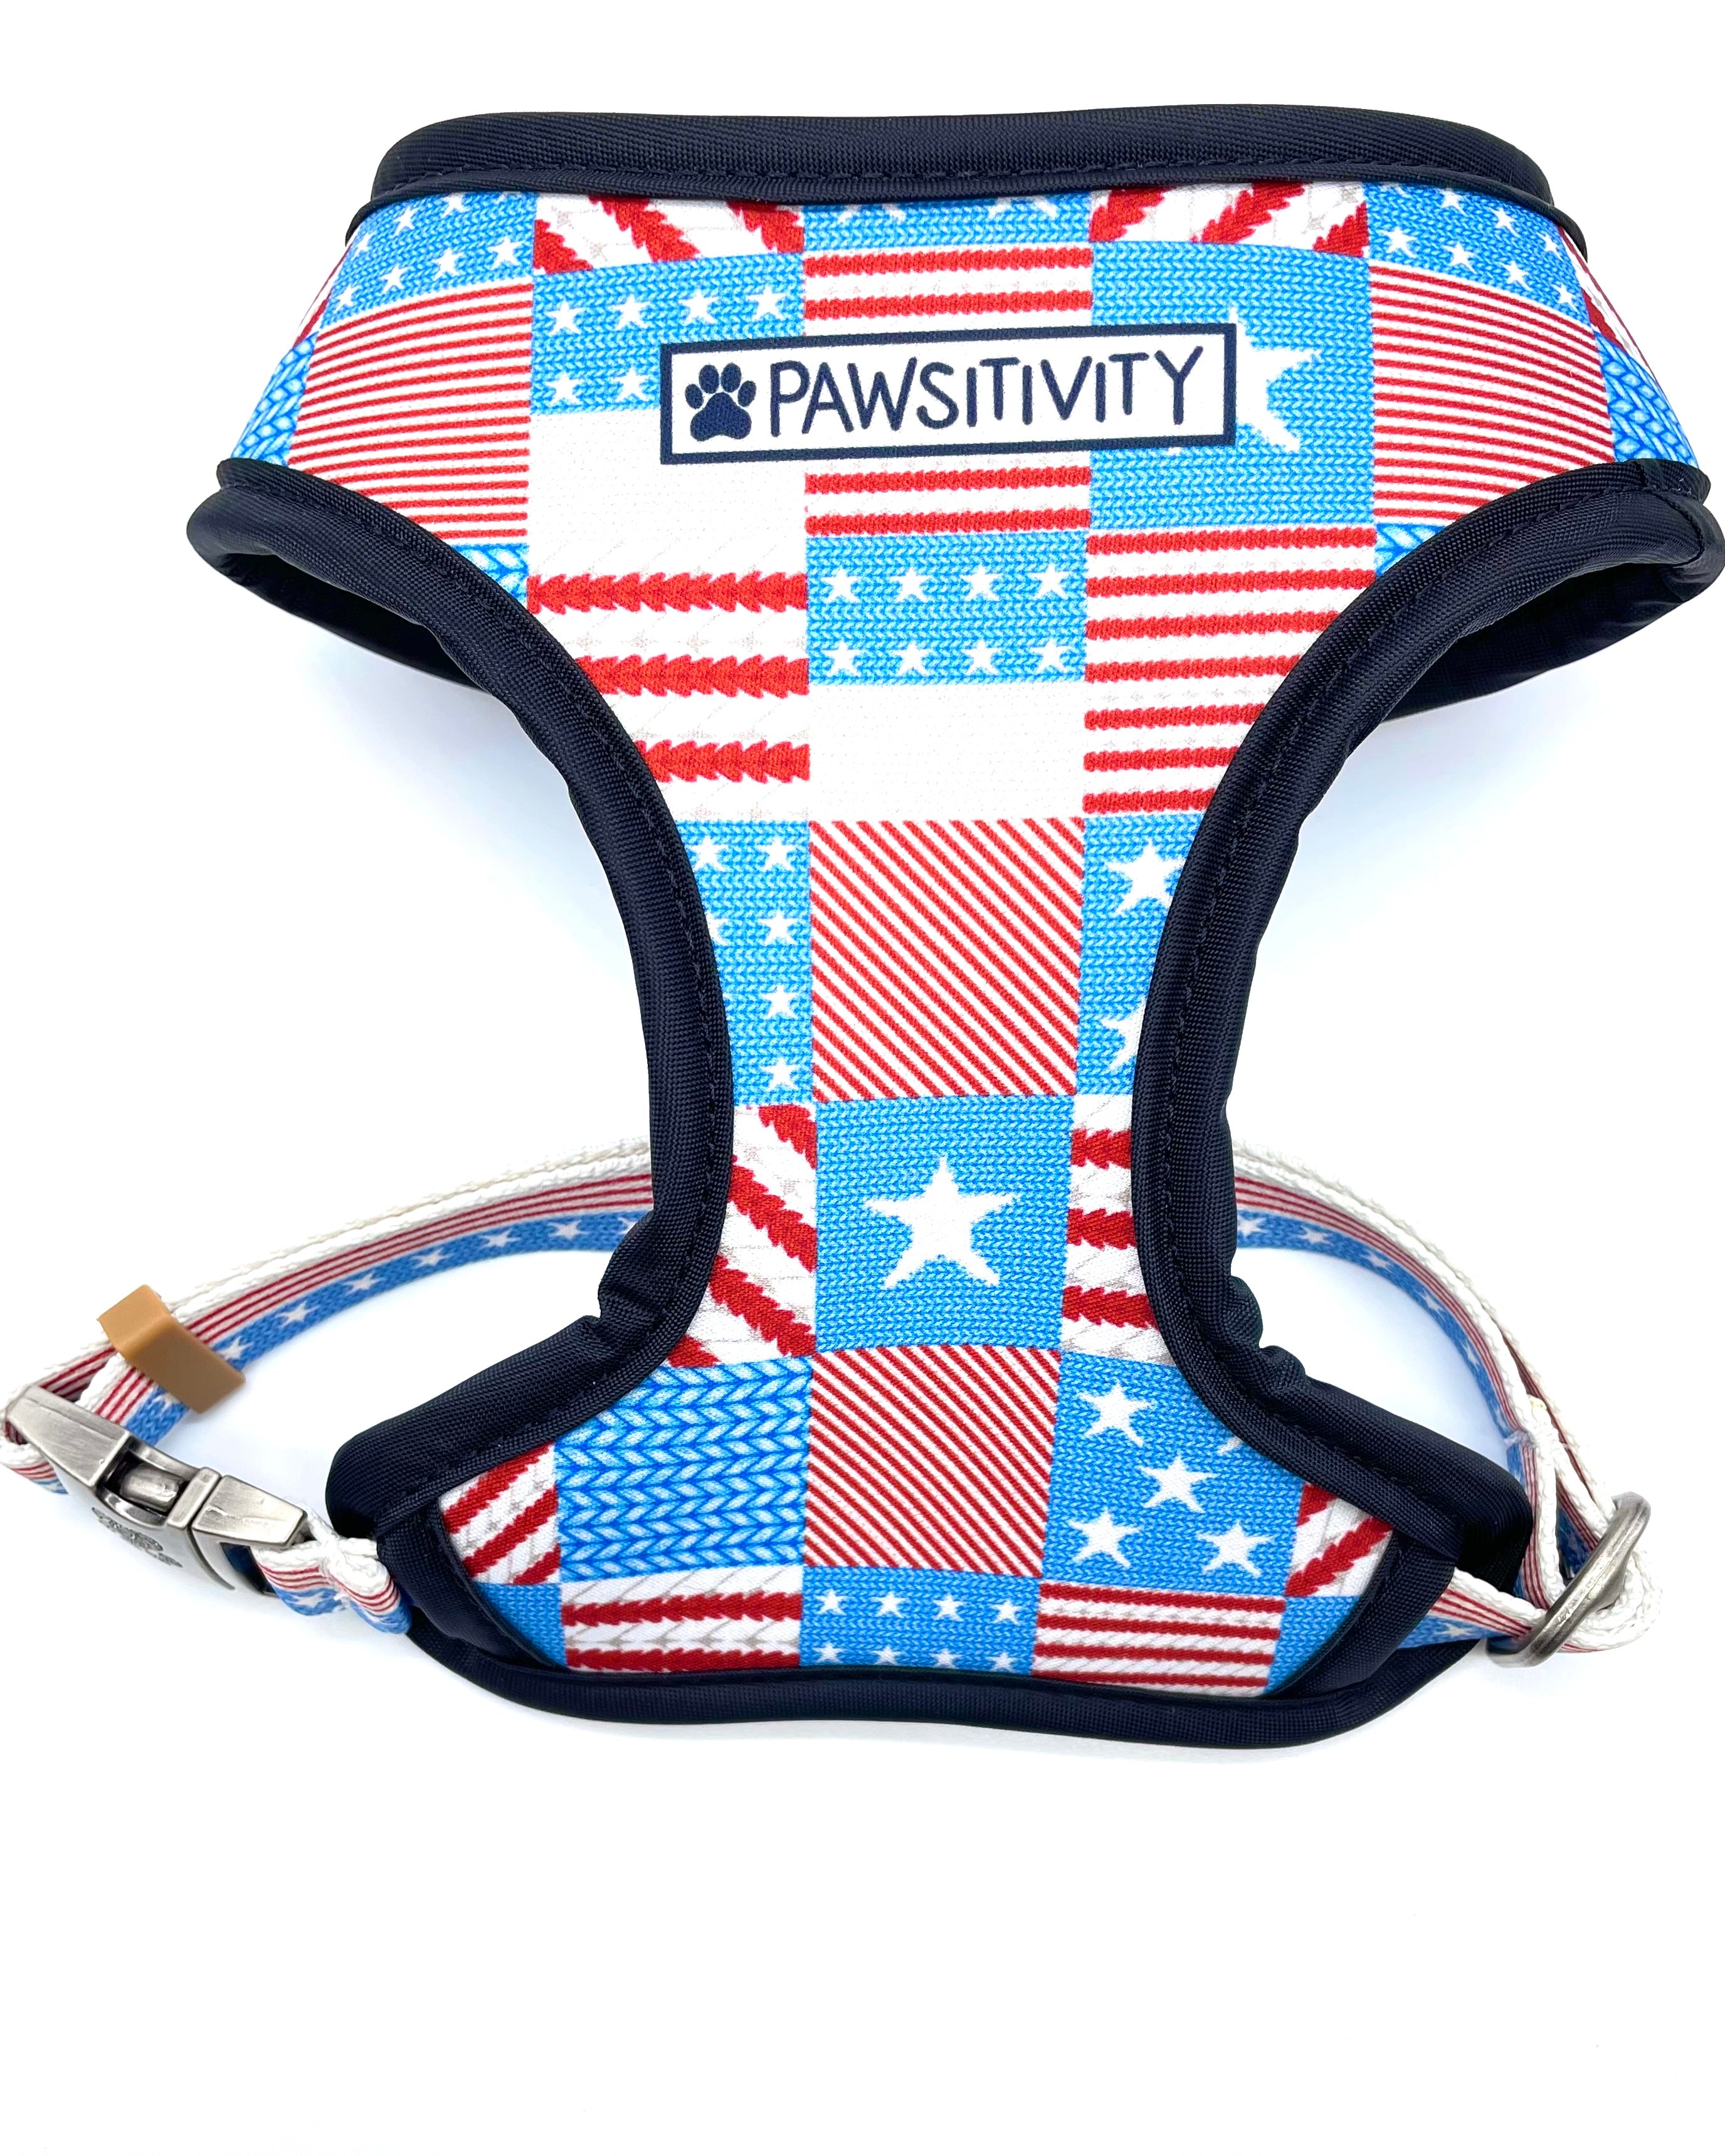 American Flag "Knit" - Star Patches Reversible Harness